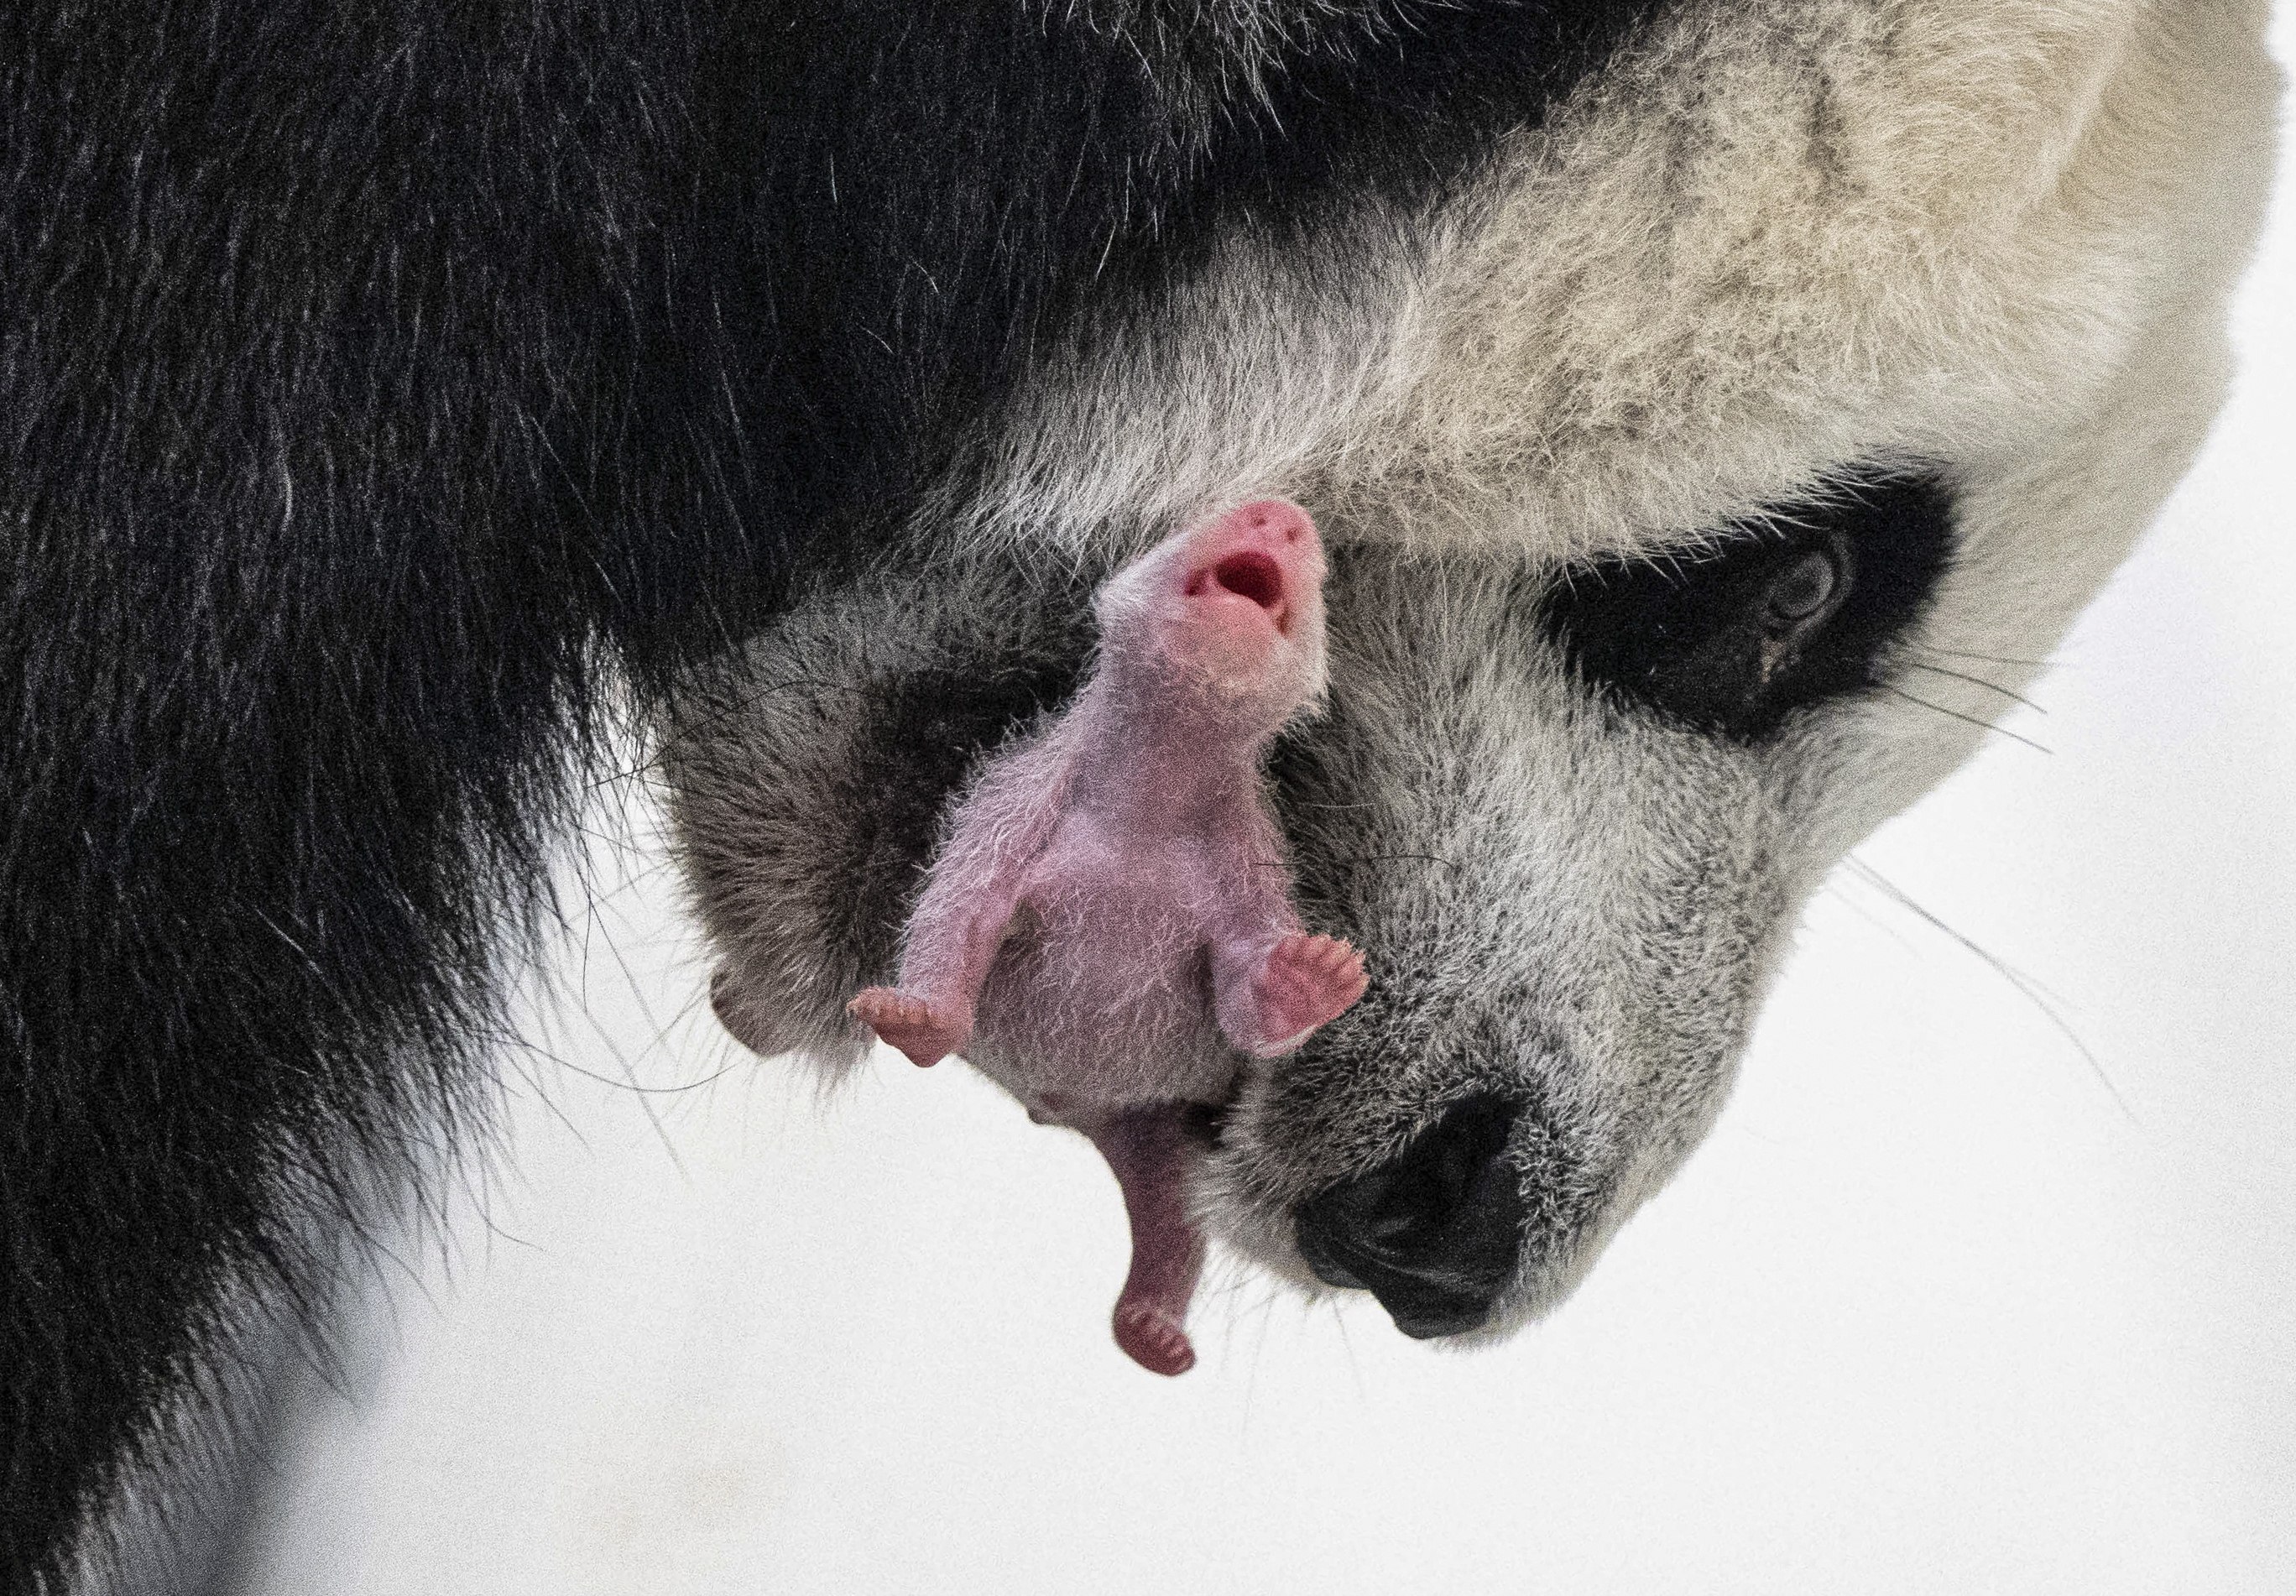 On August 31, Moscow Zoo released a photo of giant panda Dingding carrying its cub. Researchers in Scotland have found latitude affects the activity and breeding success of pandas in captivity around the world. Photo: EPA-EFE/Moscow Zoo Press Service